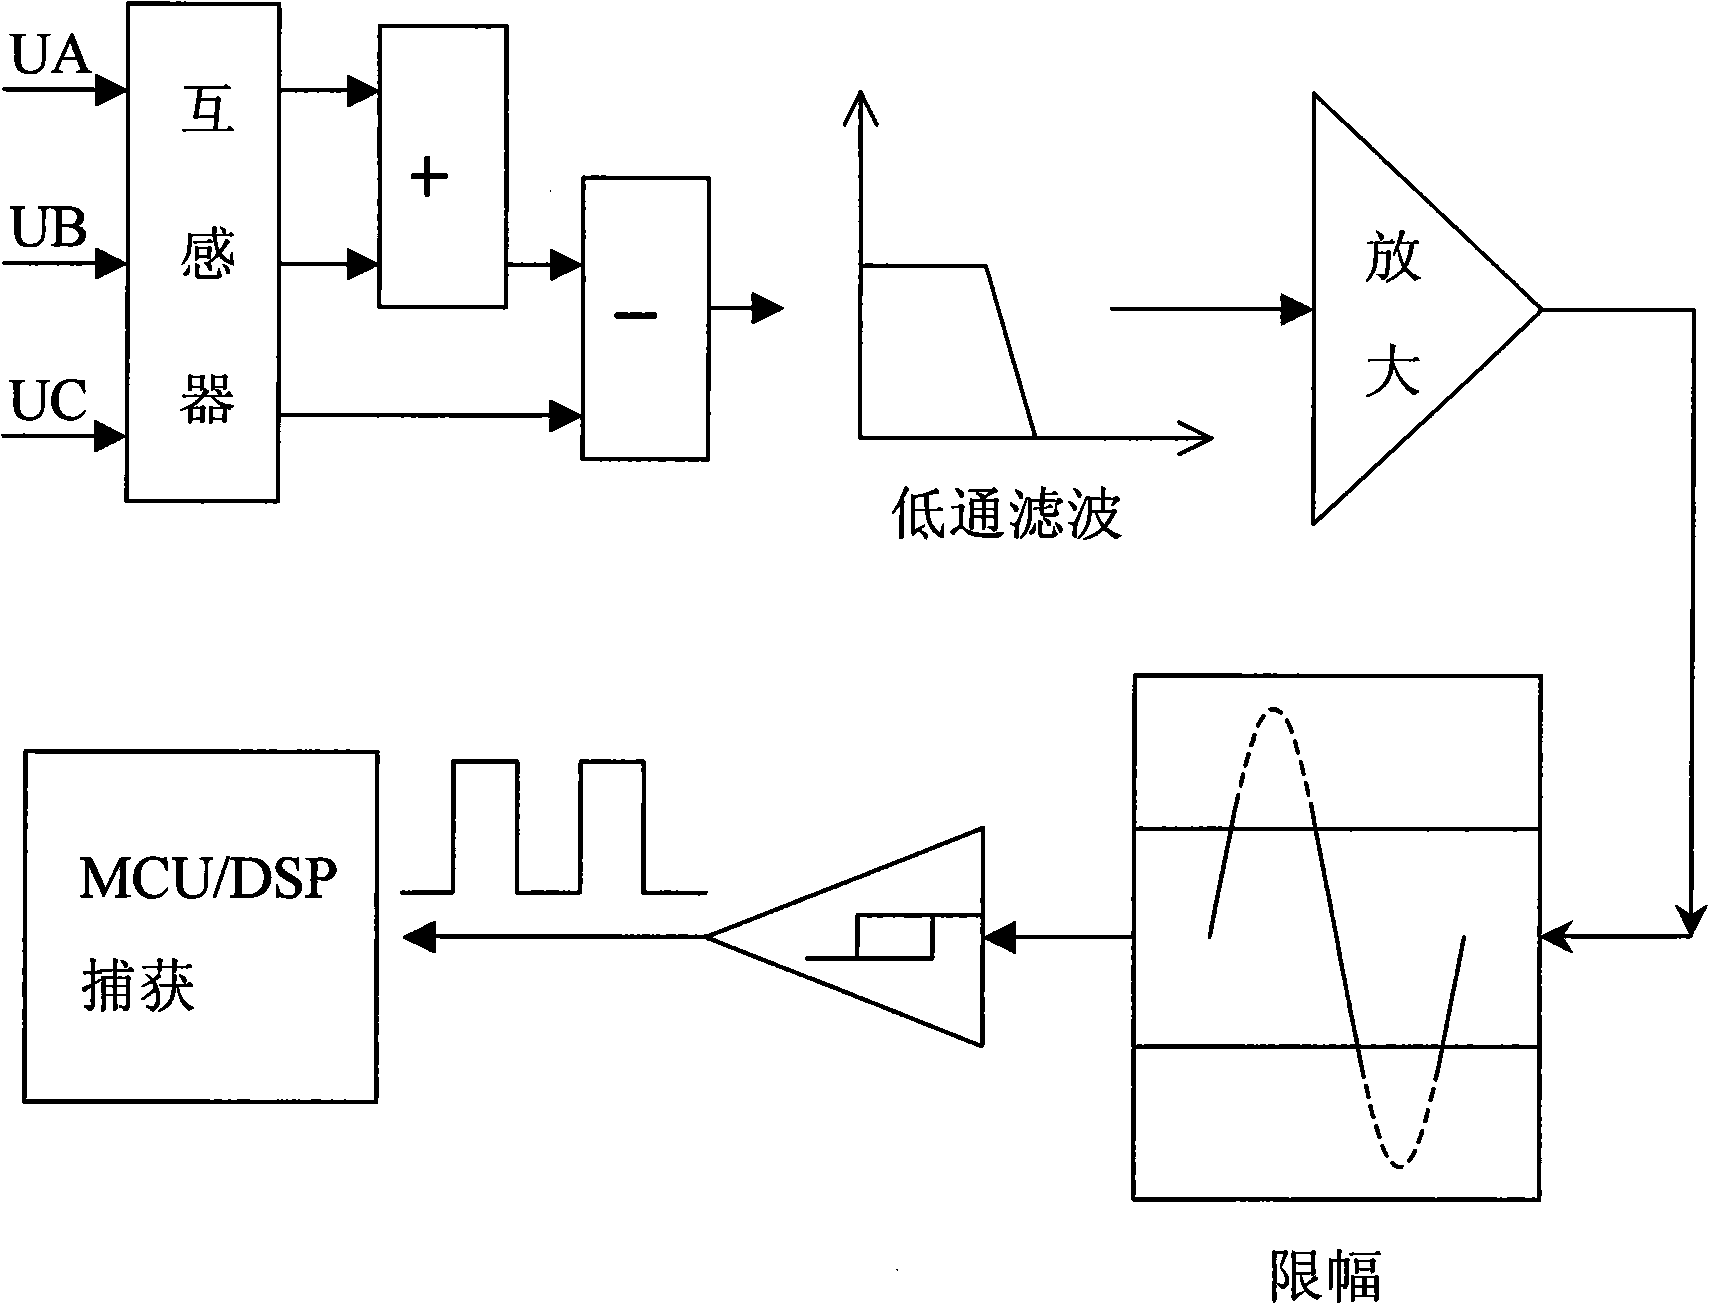 Method for monitoring electric network frequency